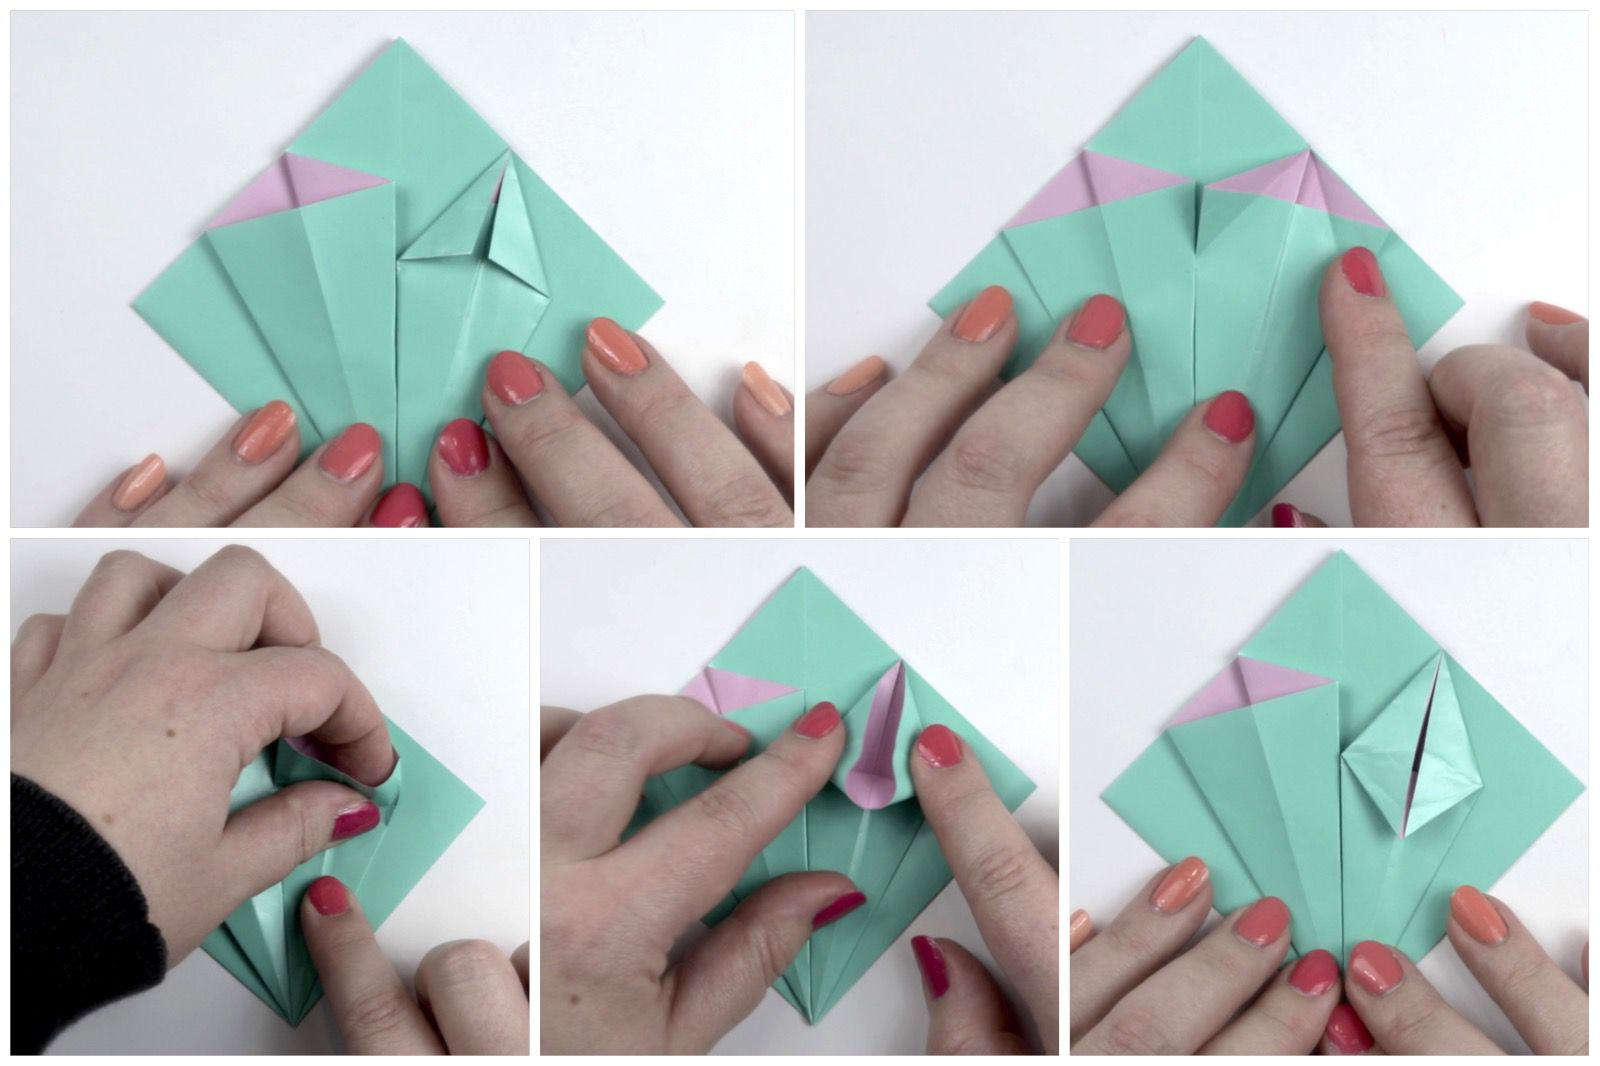 How To Make An Origami Lily Flower Make An Easy Origami Lily Flower